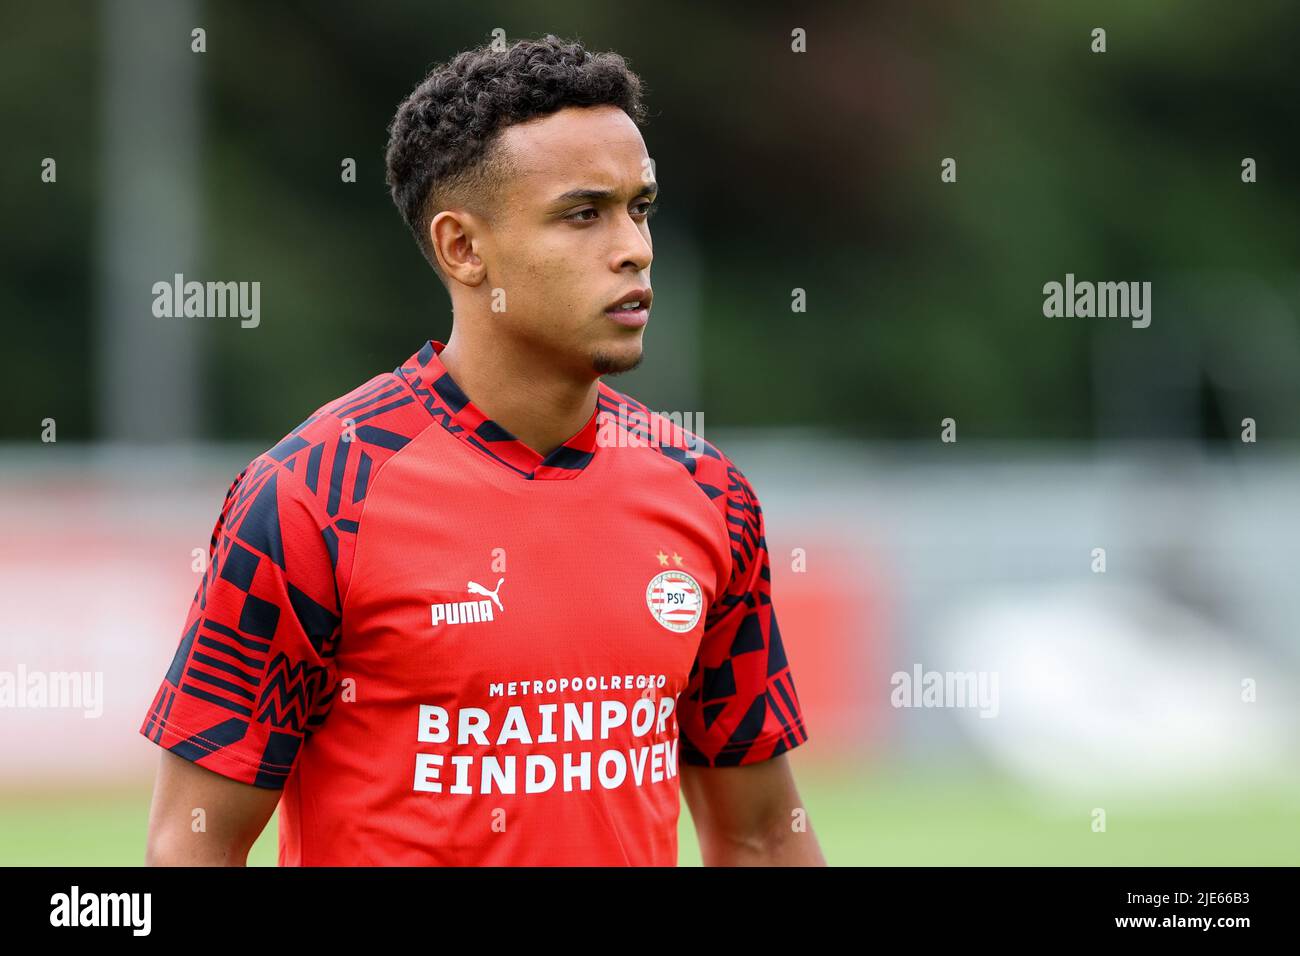 EINDHOVEN, NETHERLANDS - JUNE 25: Warming up of Walter Benitez of PSV  Eindhoven during the Pre Season Friendly match between PSV Eindhoven and BW  Lohne at PSV Campus De Herdgang on June